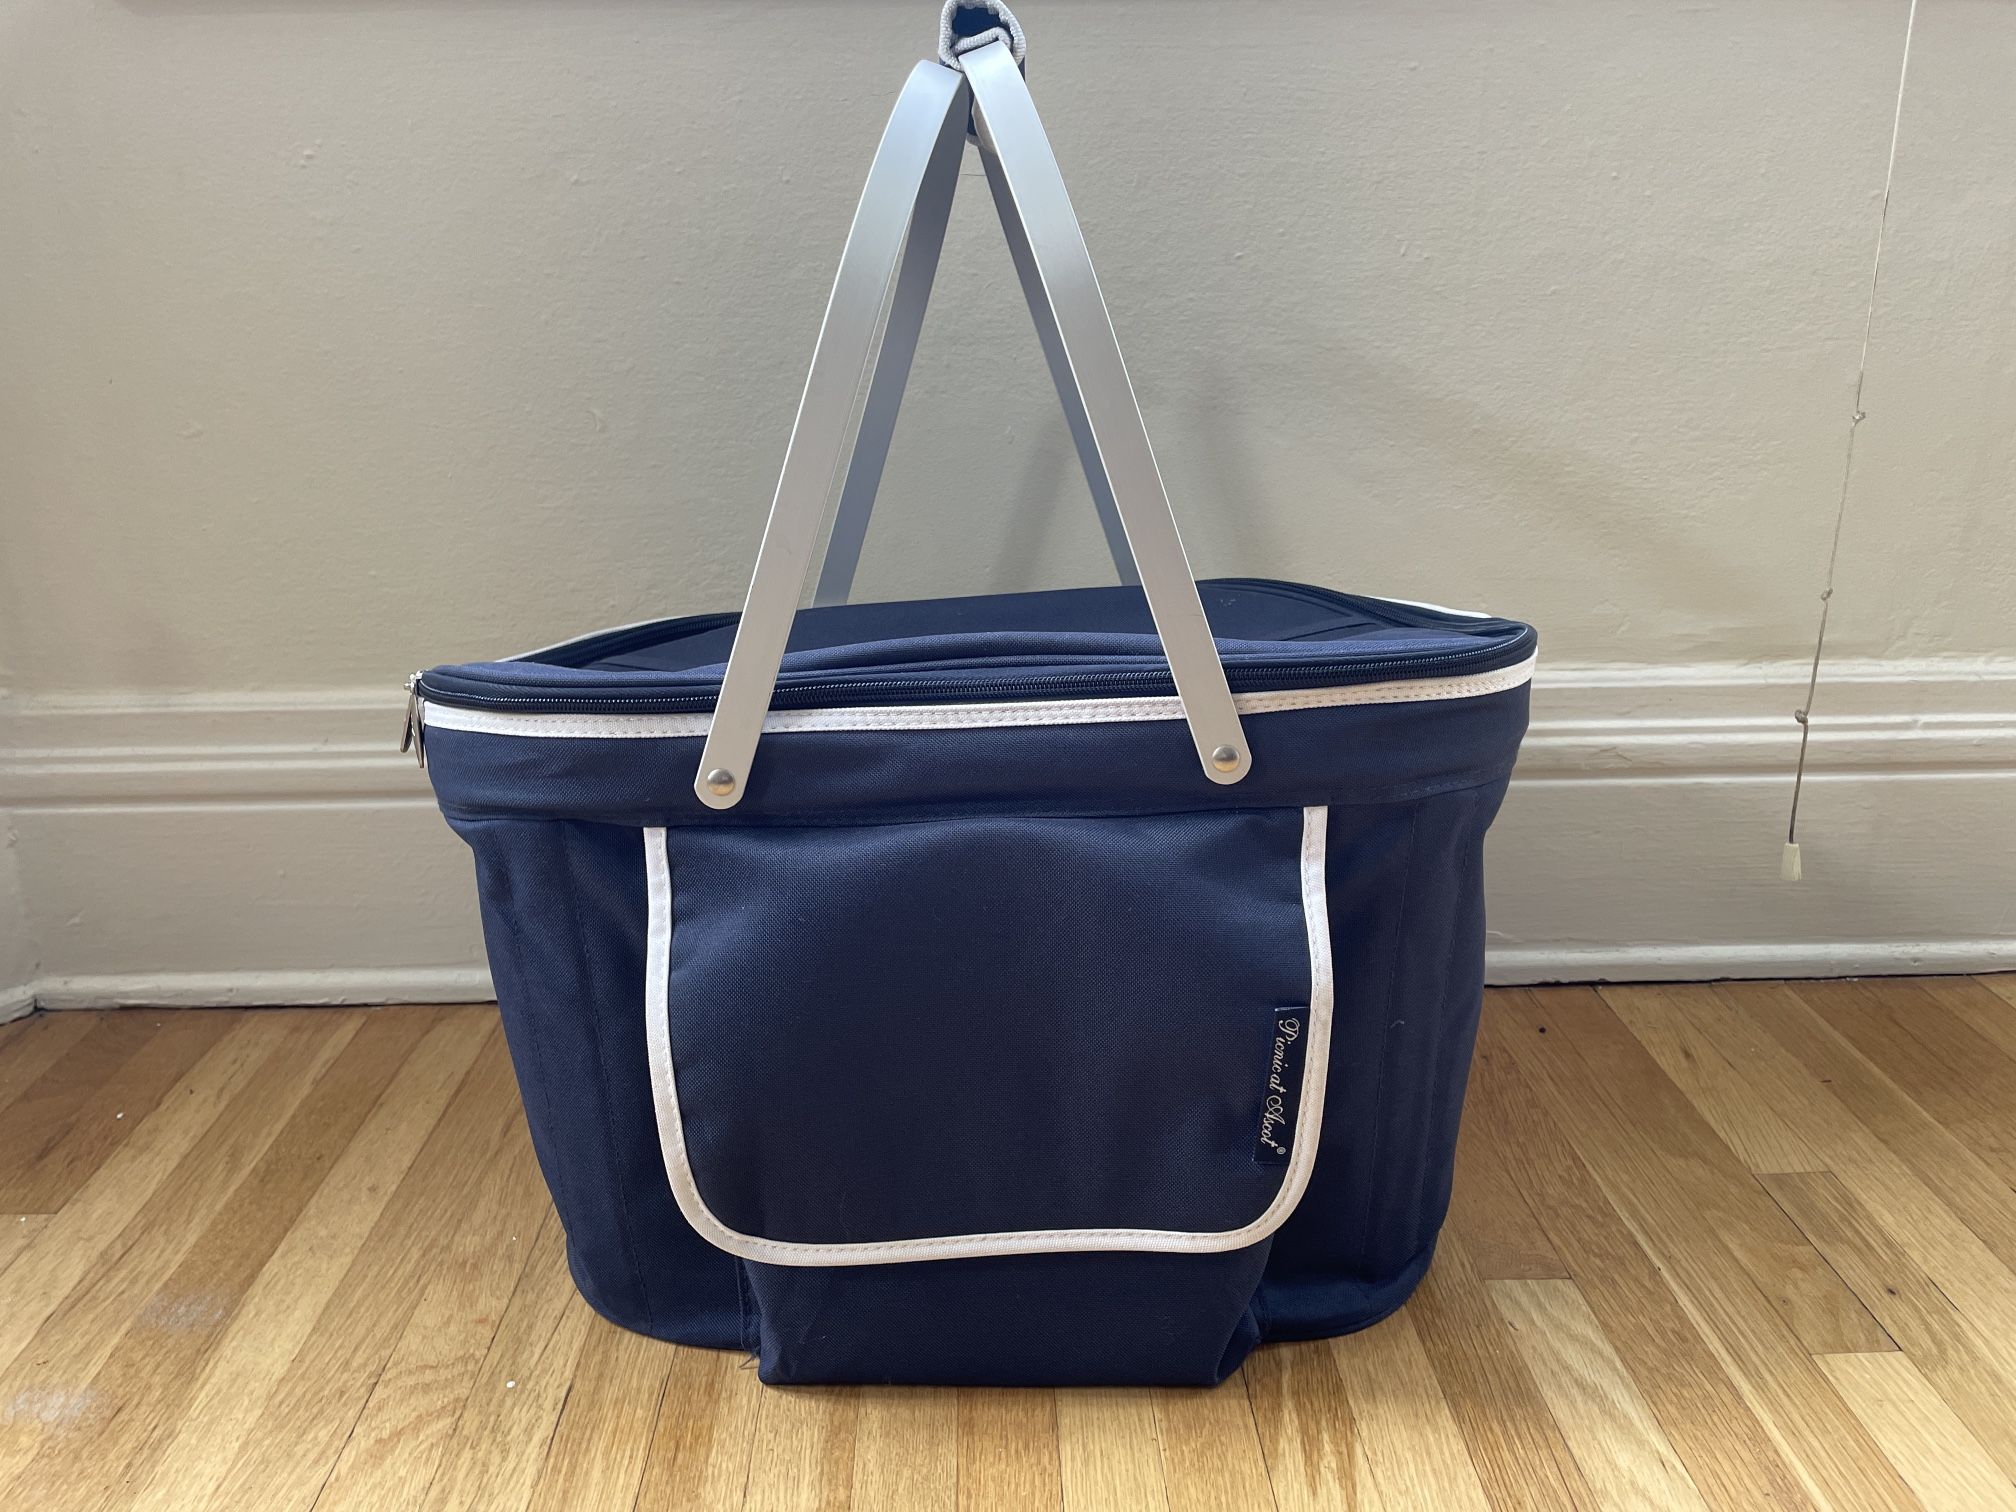 Collapsible Insulated Picnic Basket